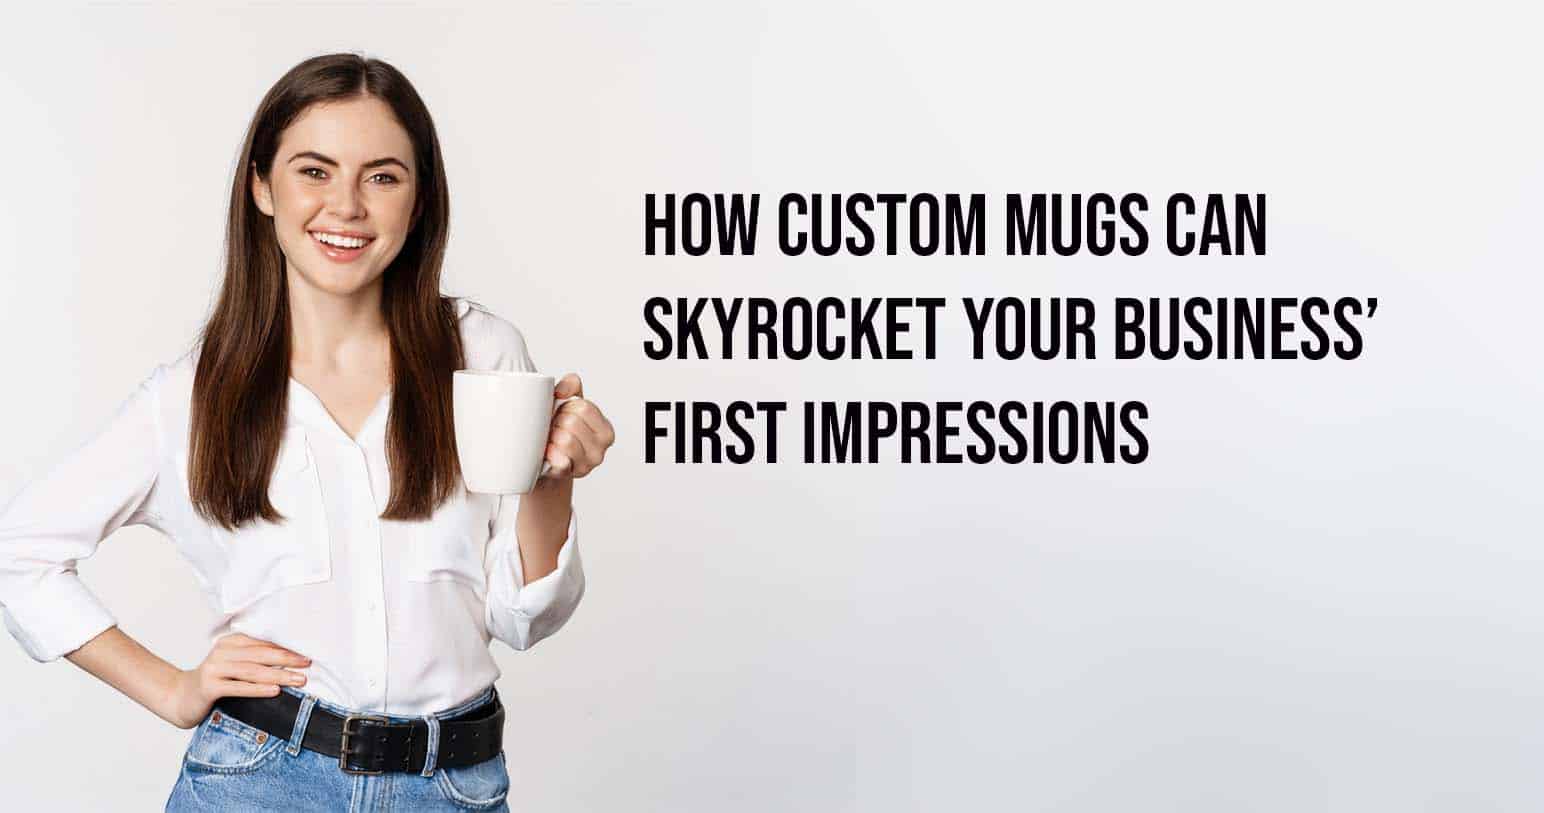 How Custom Mugs Can Skyrocket Your Business’ First Impressions